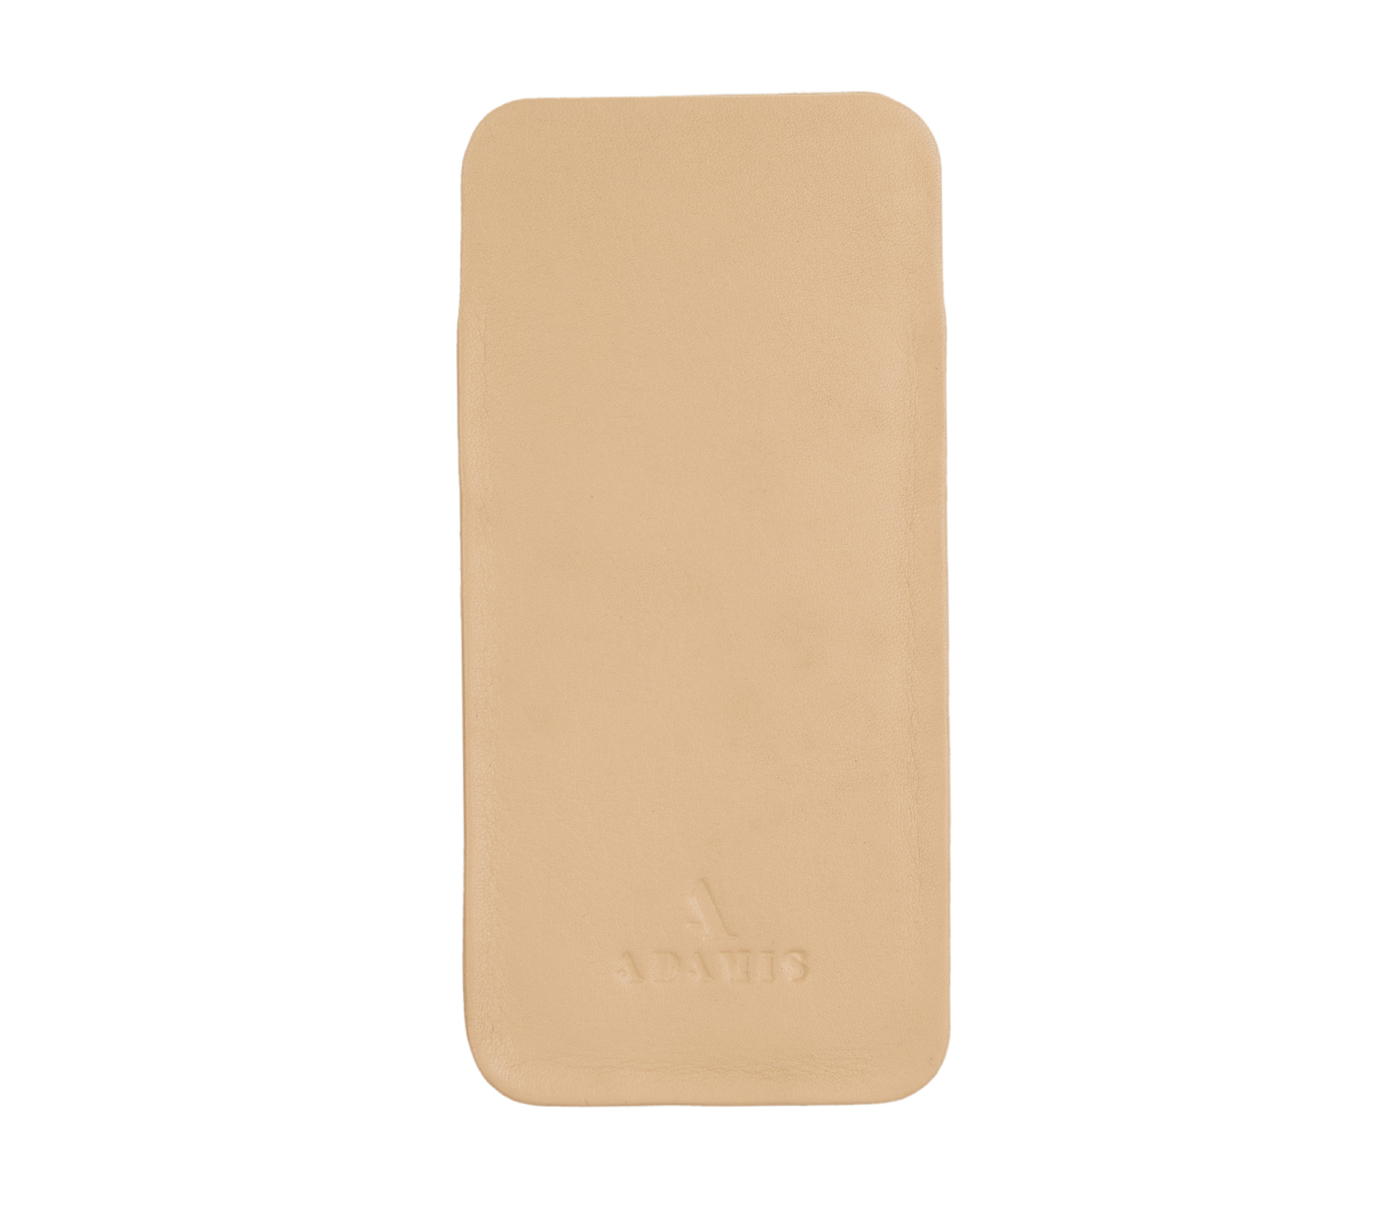 Spectacle Case--Soft stitch free spectacle case in Genuine Leather - Beige